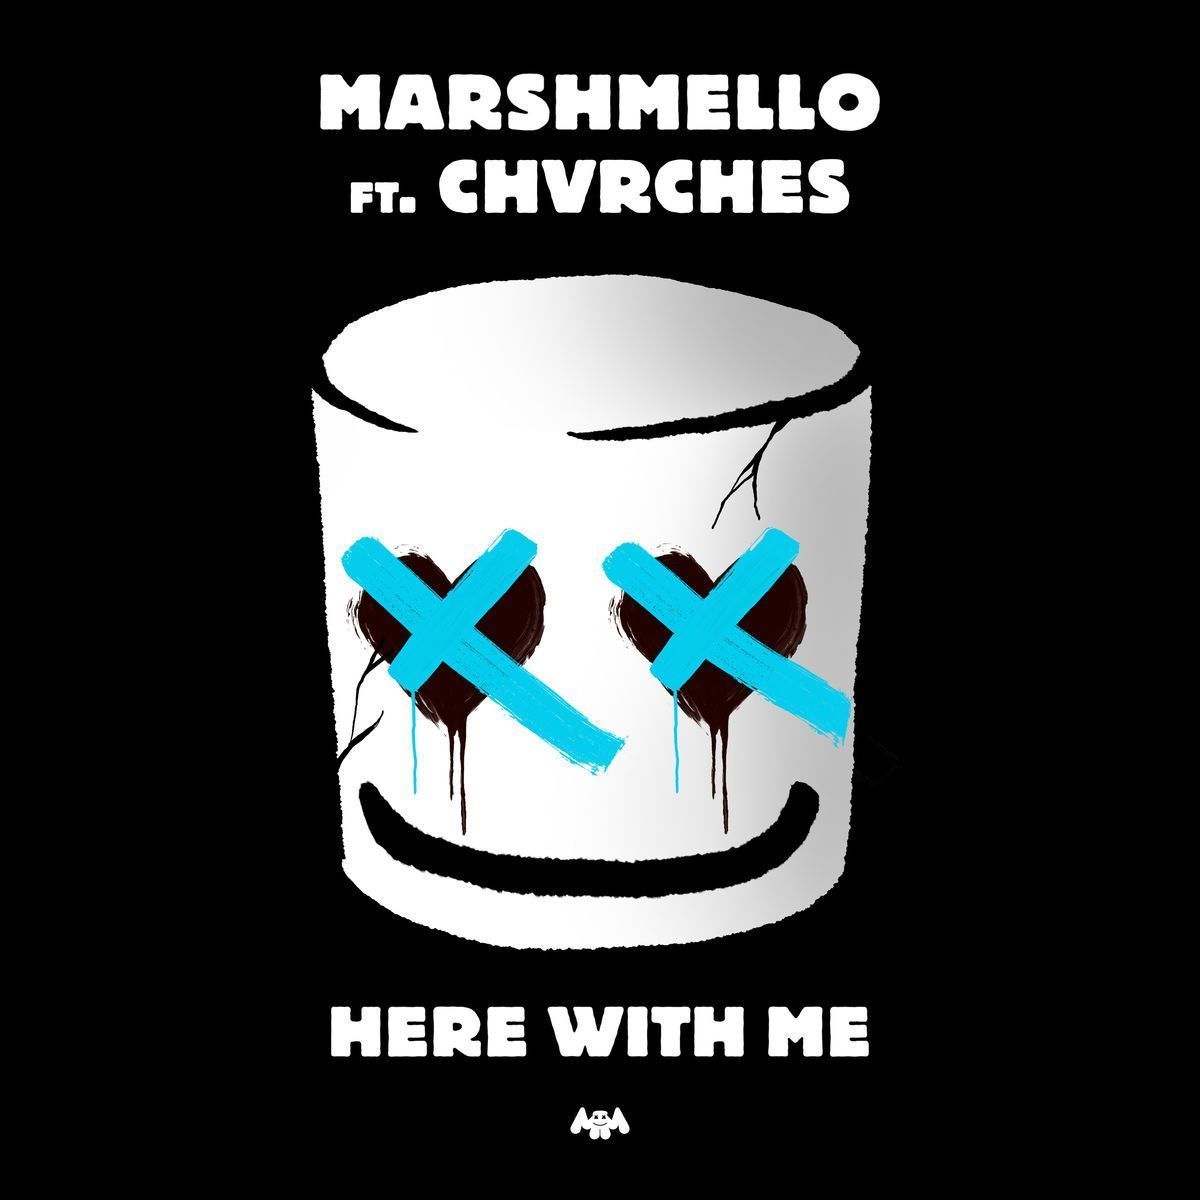 remixes: Marshmello With Me (feat Chvrches) Pink Panda